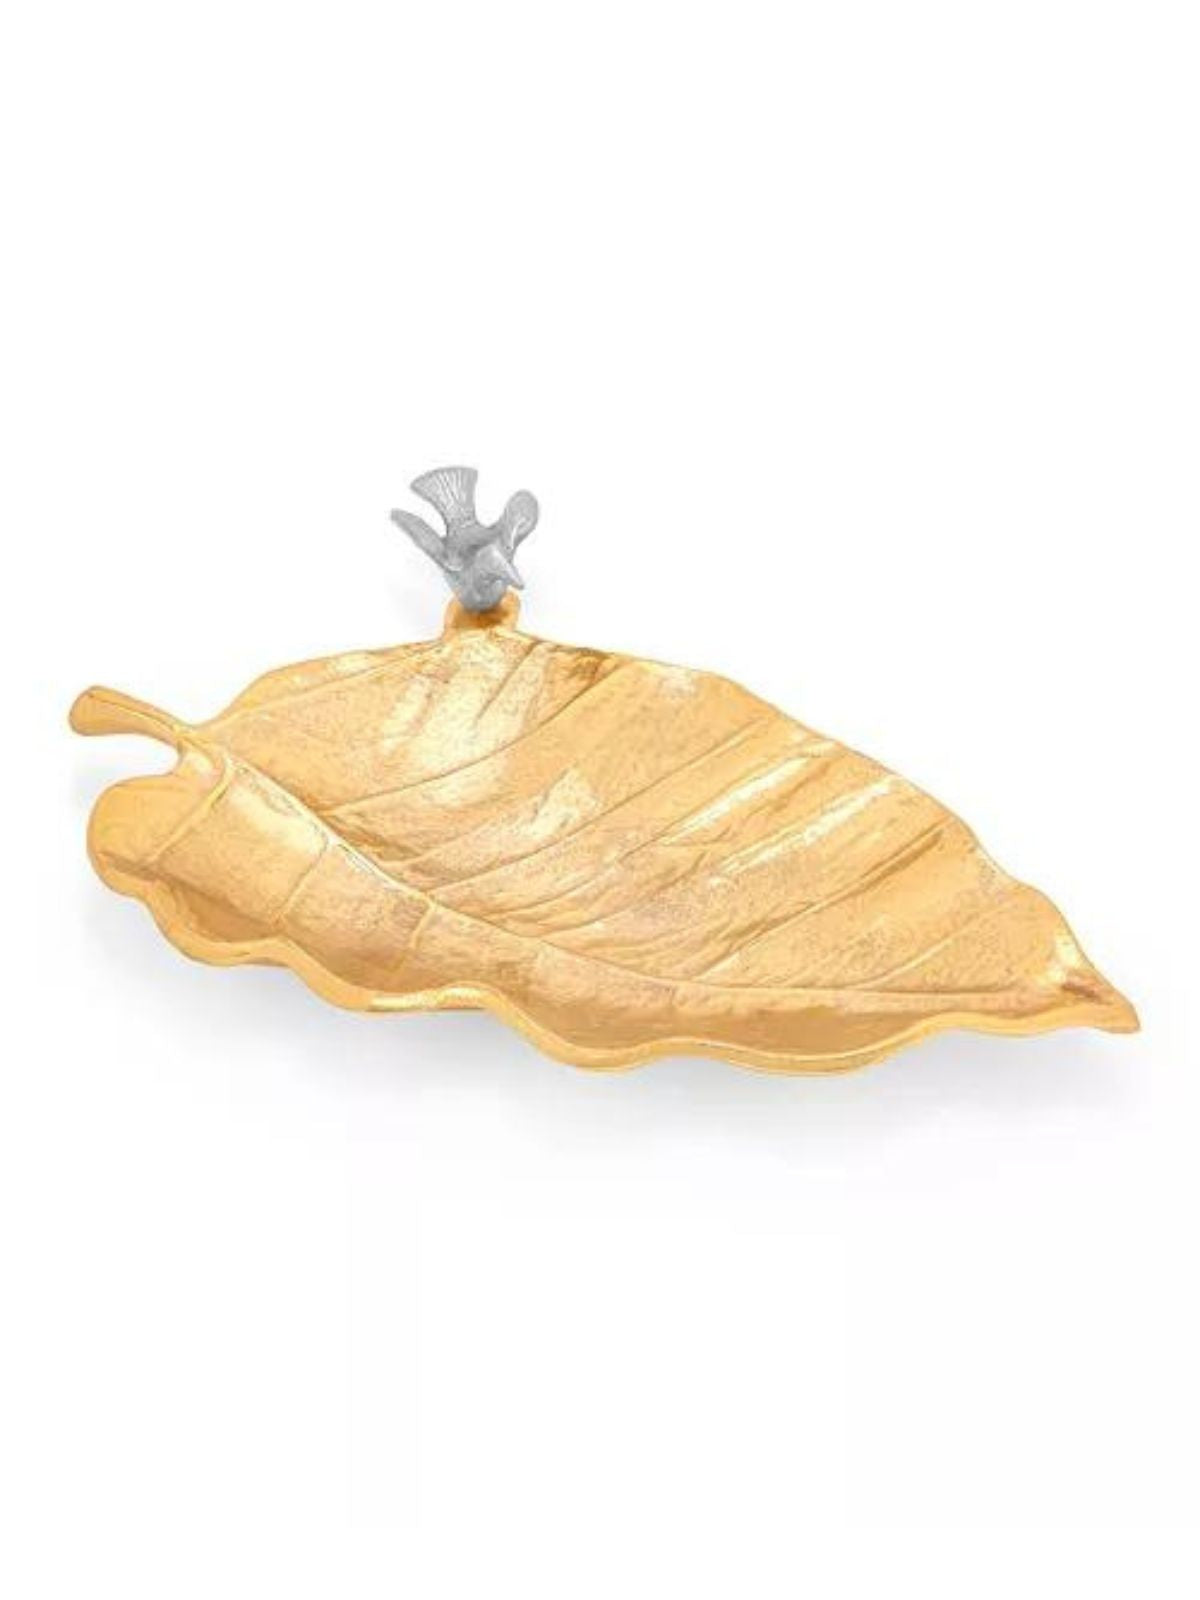 These magnificent 11L Leaf shaped dish bring an extra aura to every display setting. It is polished with some glossy gold finish and silver bird. Sold by KYA Home Decor